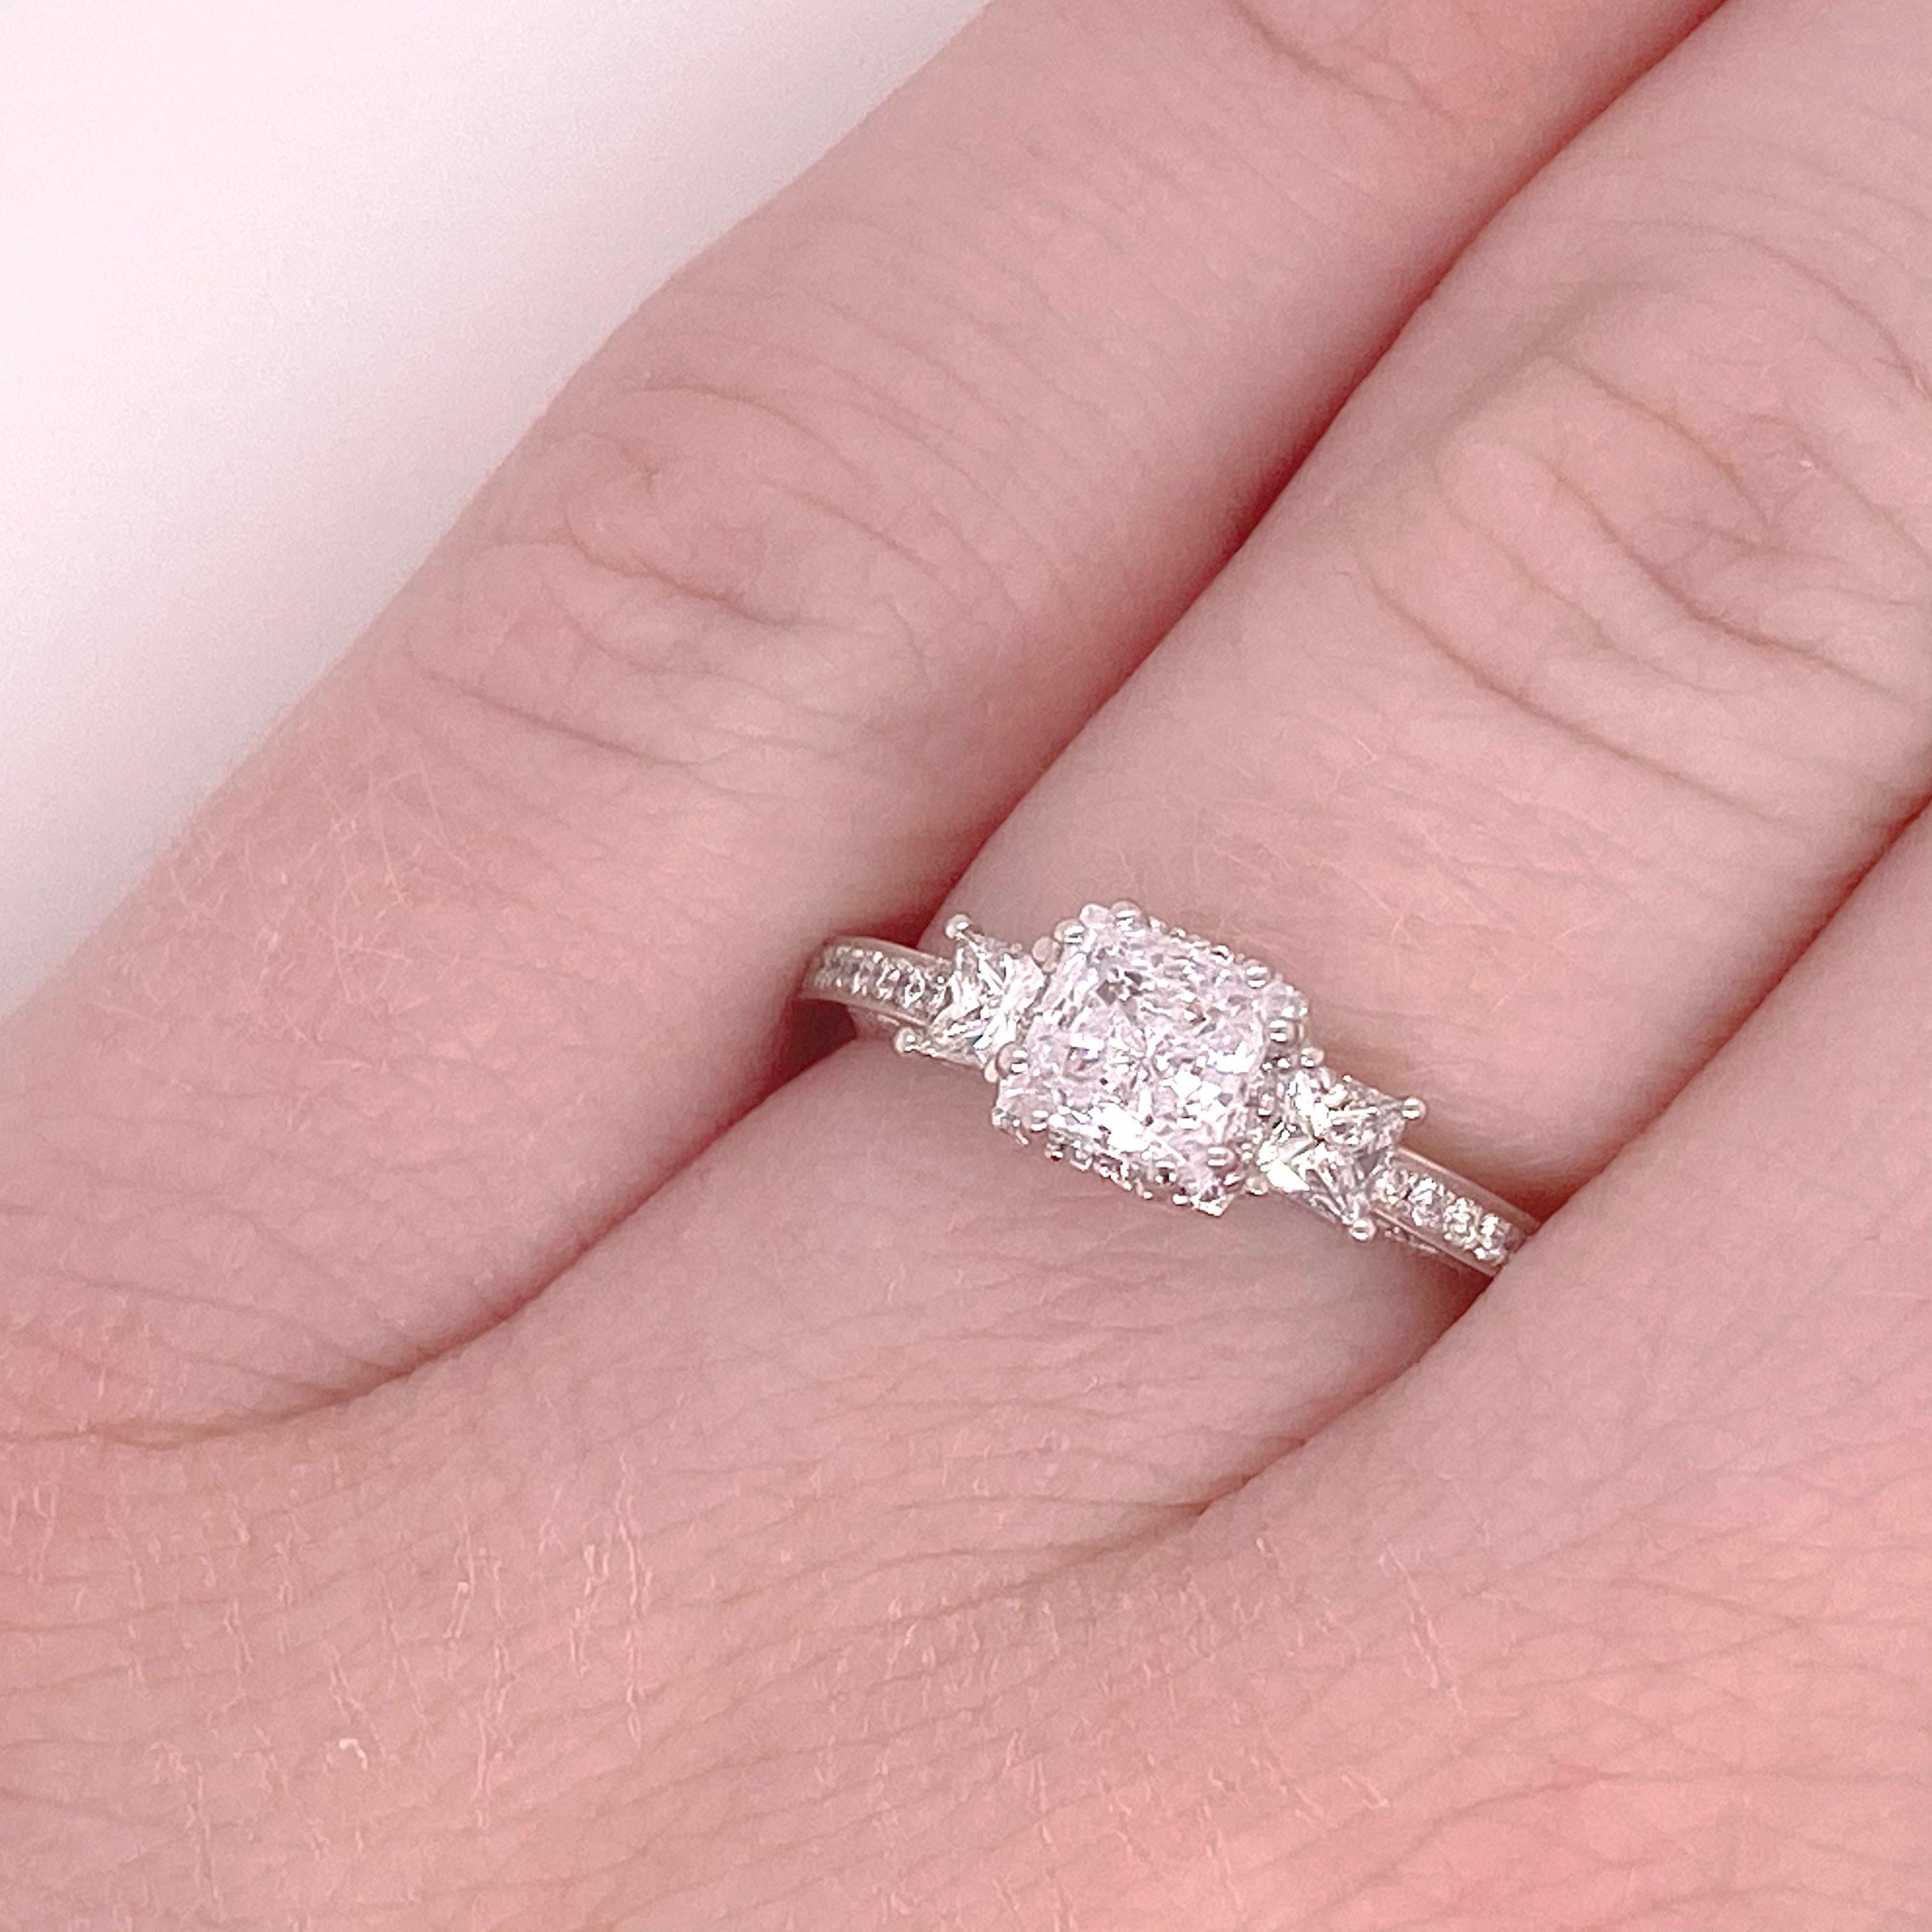 Tacori Princess Diamond Engagement Ring! This three stone diamond engagement ring is an original TACORI 18k WHITE GOLD RING. The Tacori engagement rings are designer creations that are unique, very special, and extremely gorgeous. This ring has a